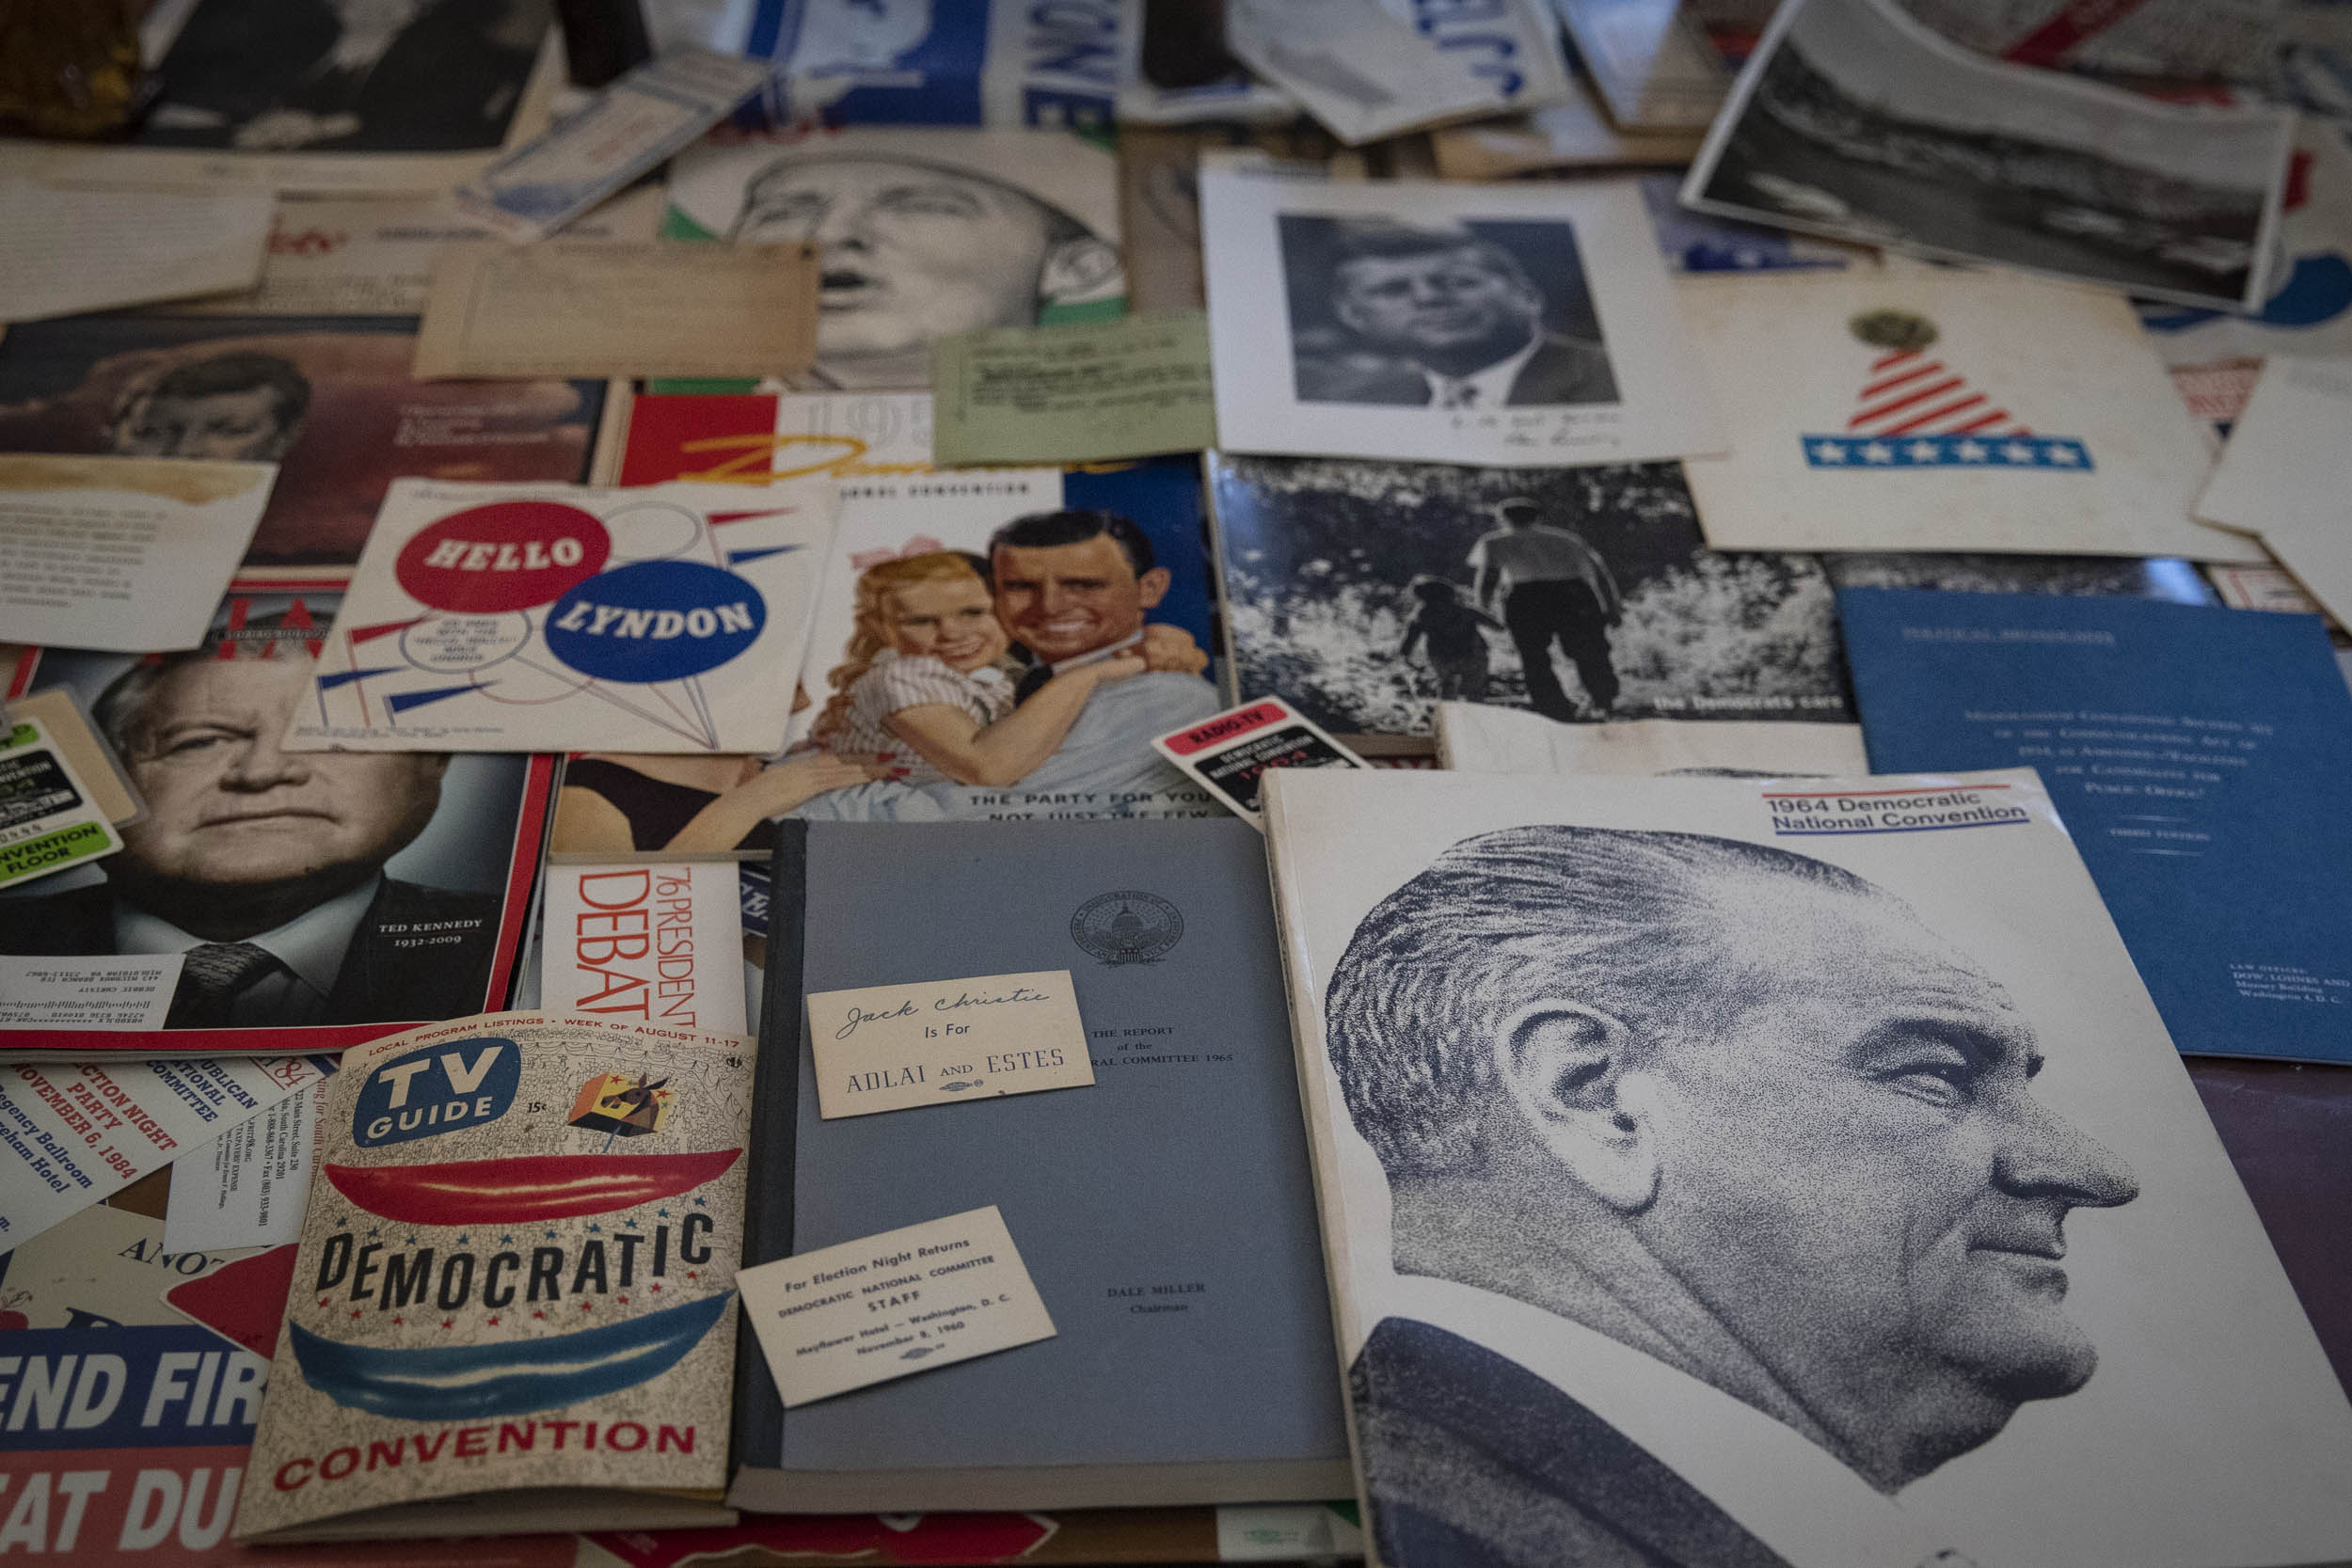 Table filled with various Presidential memorabilia